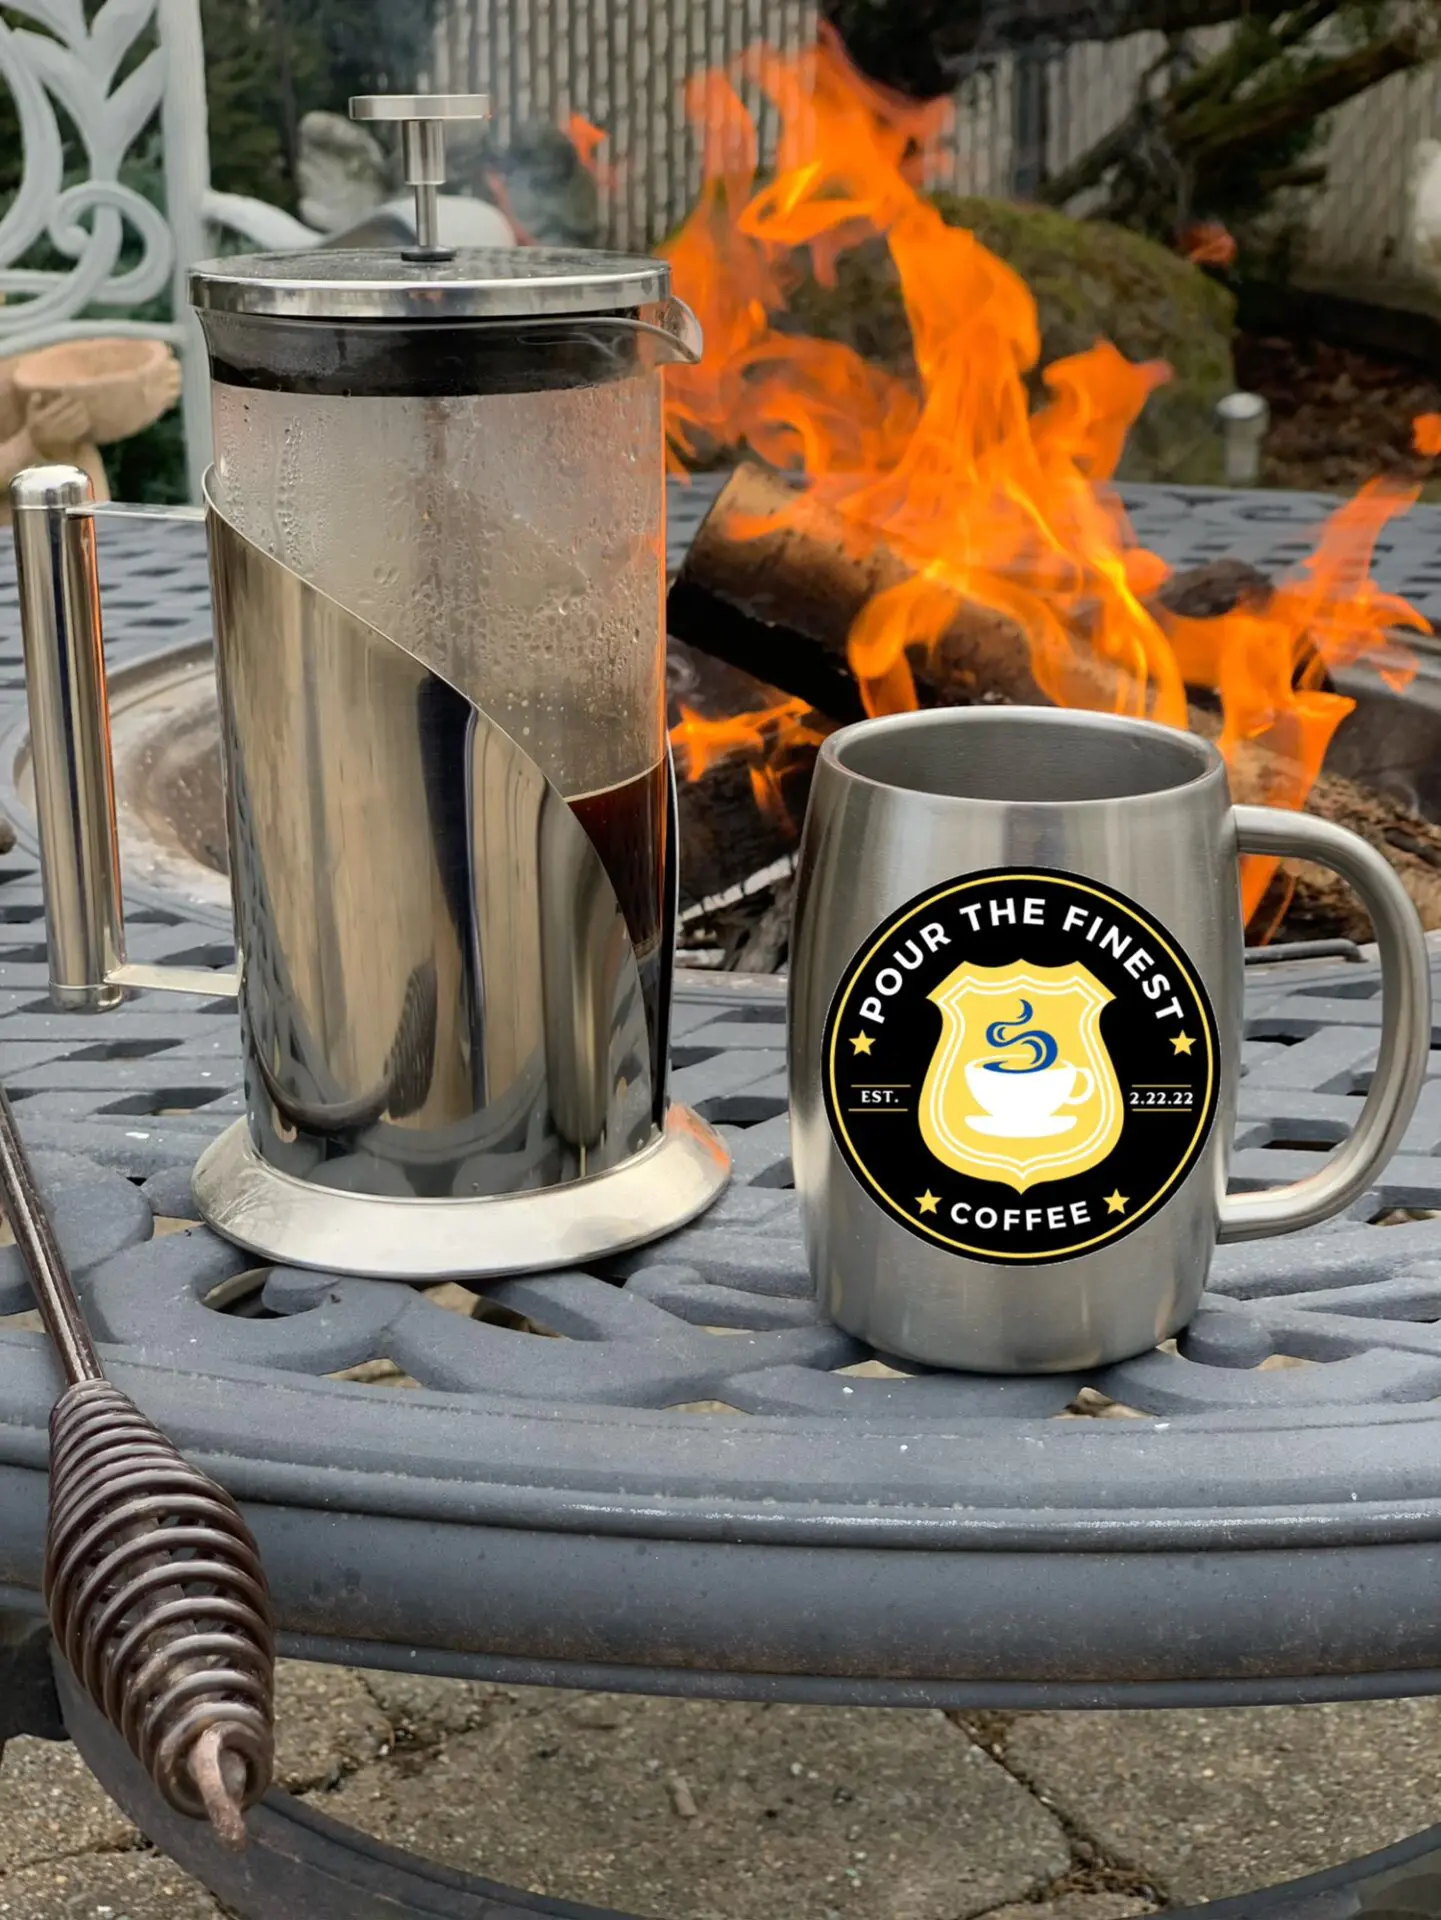 A round table with fire and coffee mug and cup are placed around